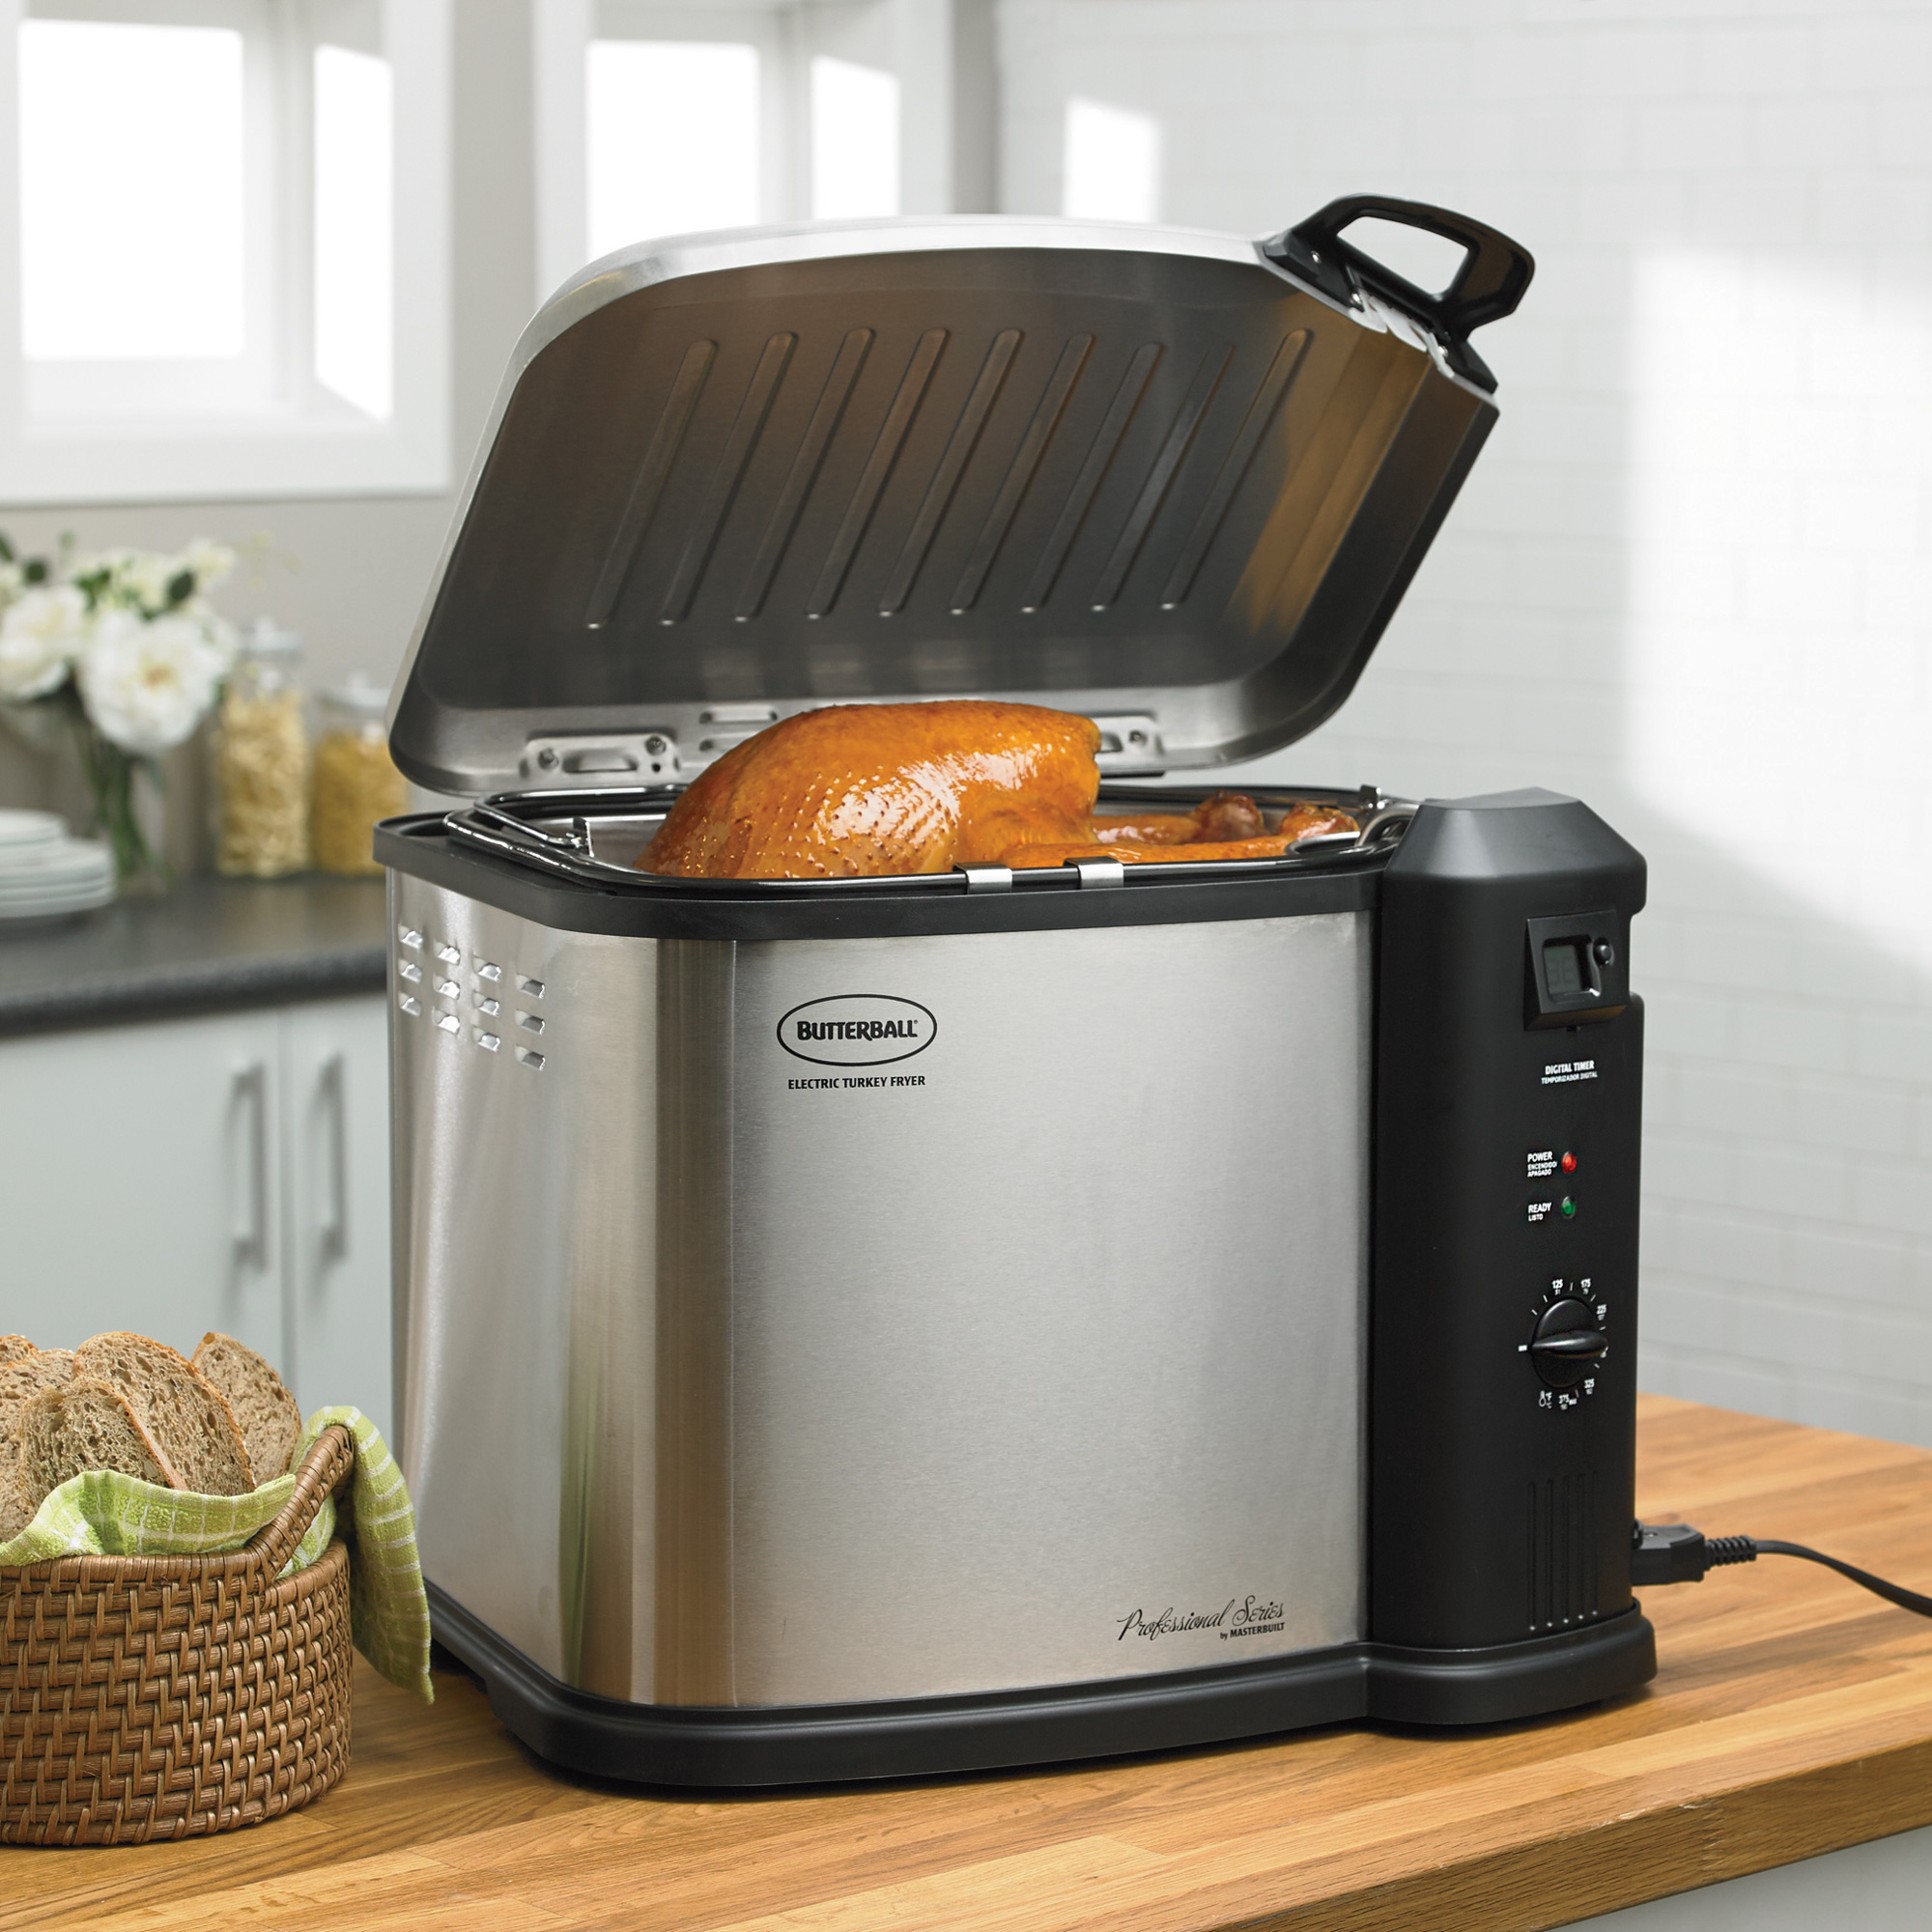 https://www.indianaconnection.org/wp-content/uploads/2015/10/Butterball-XL-Indoor-Electric-Turkey-Fryer.jpg